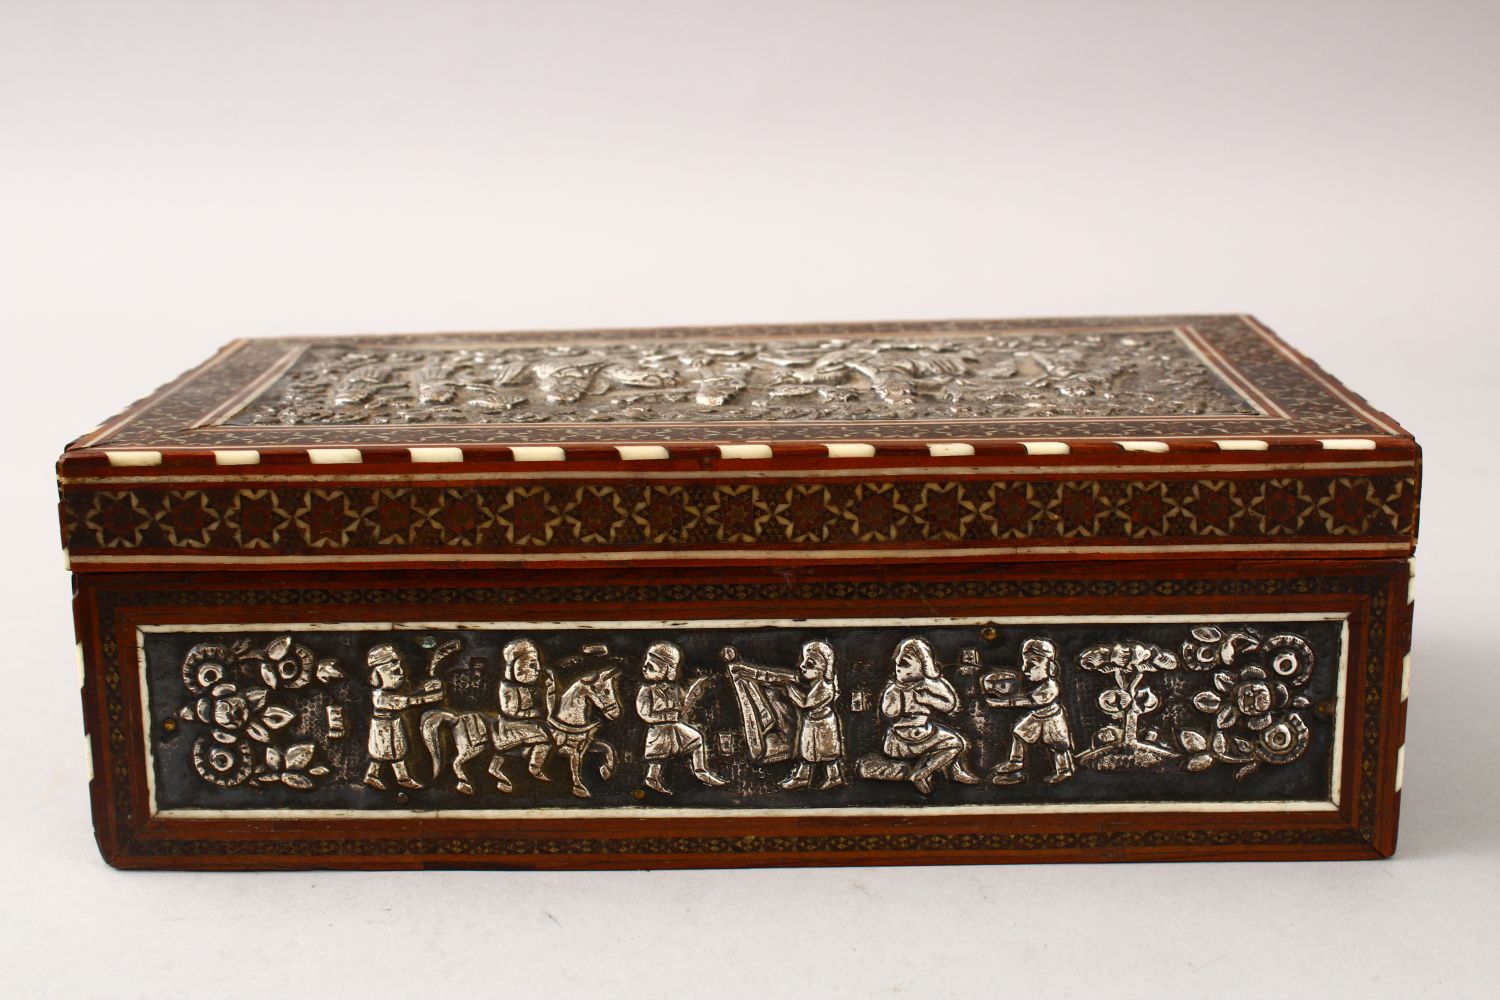 A GOOD IRANIAN SHIRAZ KHATEMI WOODEN & WHITE METAL BOX, the bod with inset white metal embossed - Image 6 of 10